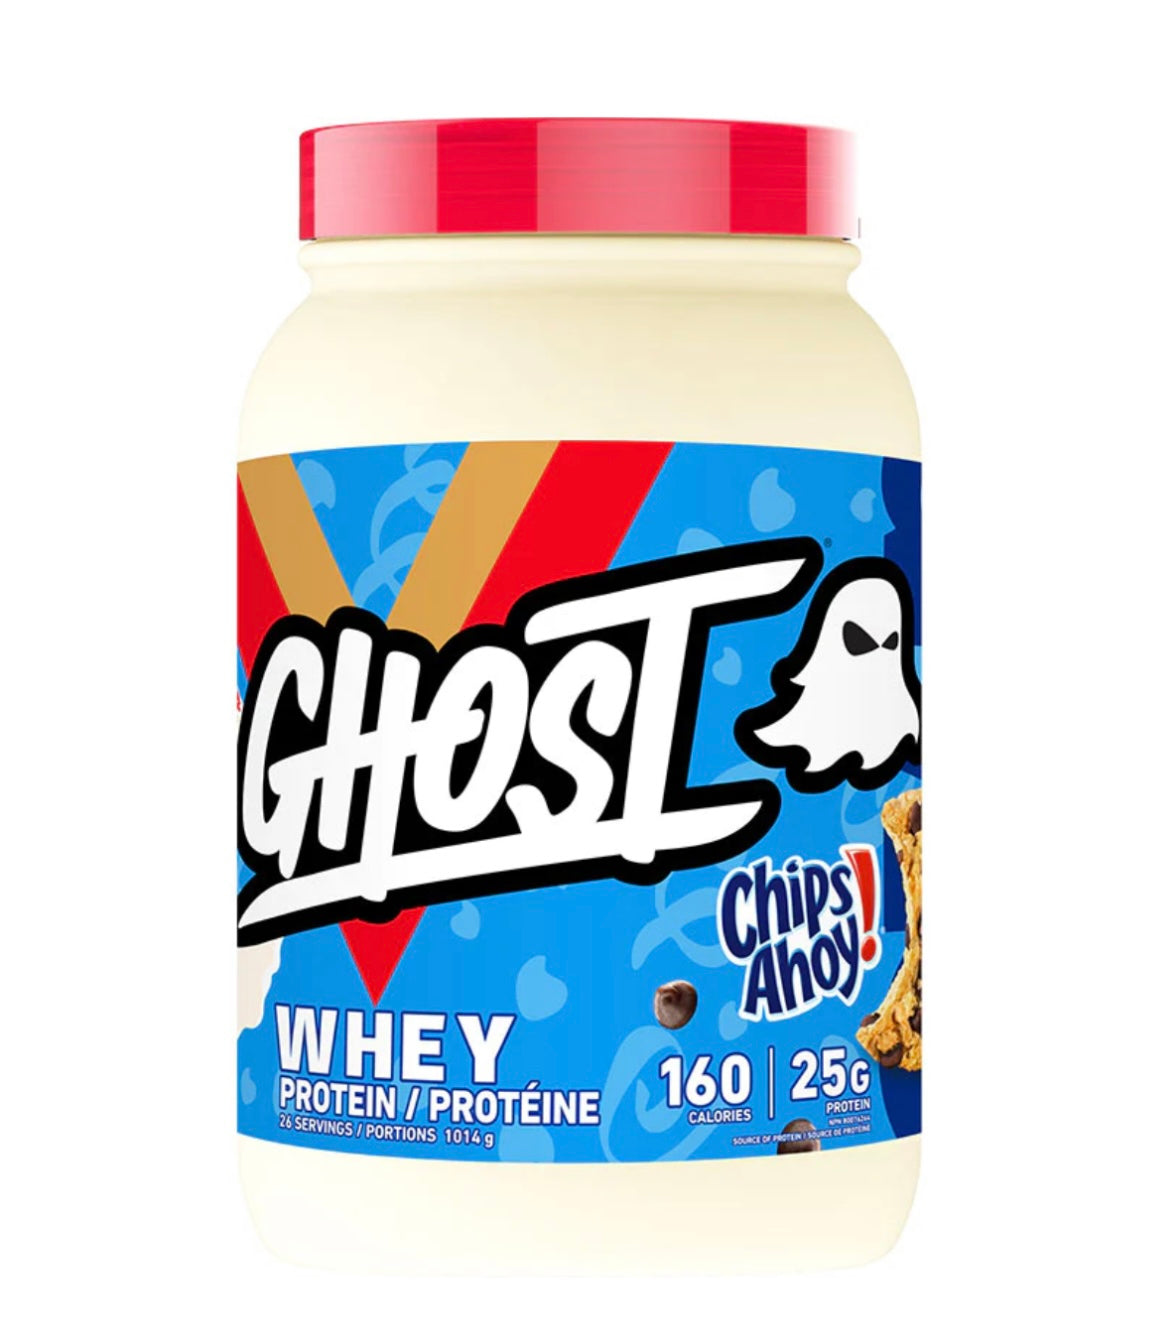 Ghost Whey Protein - 2 Lbs